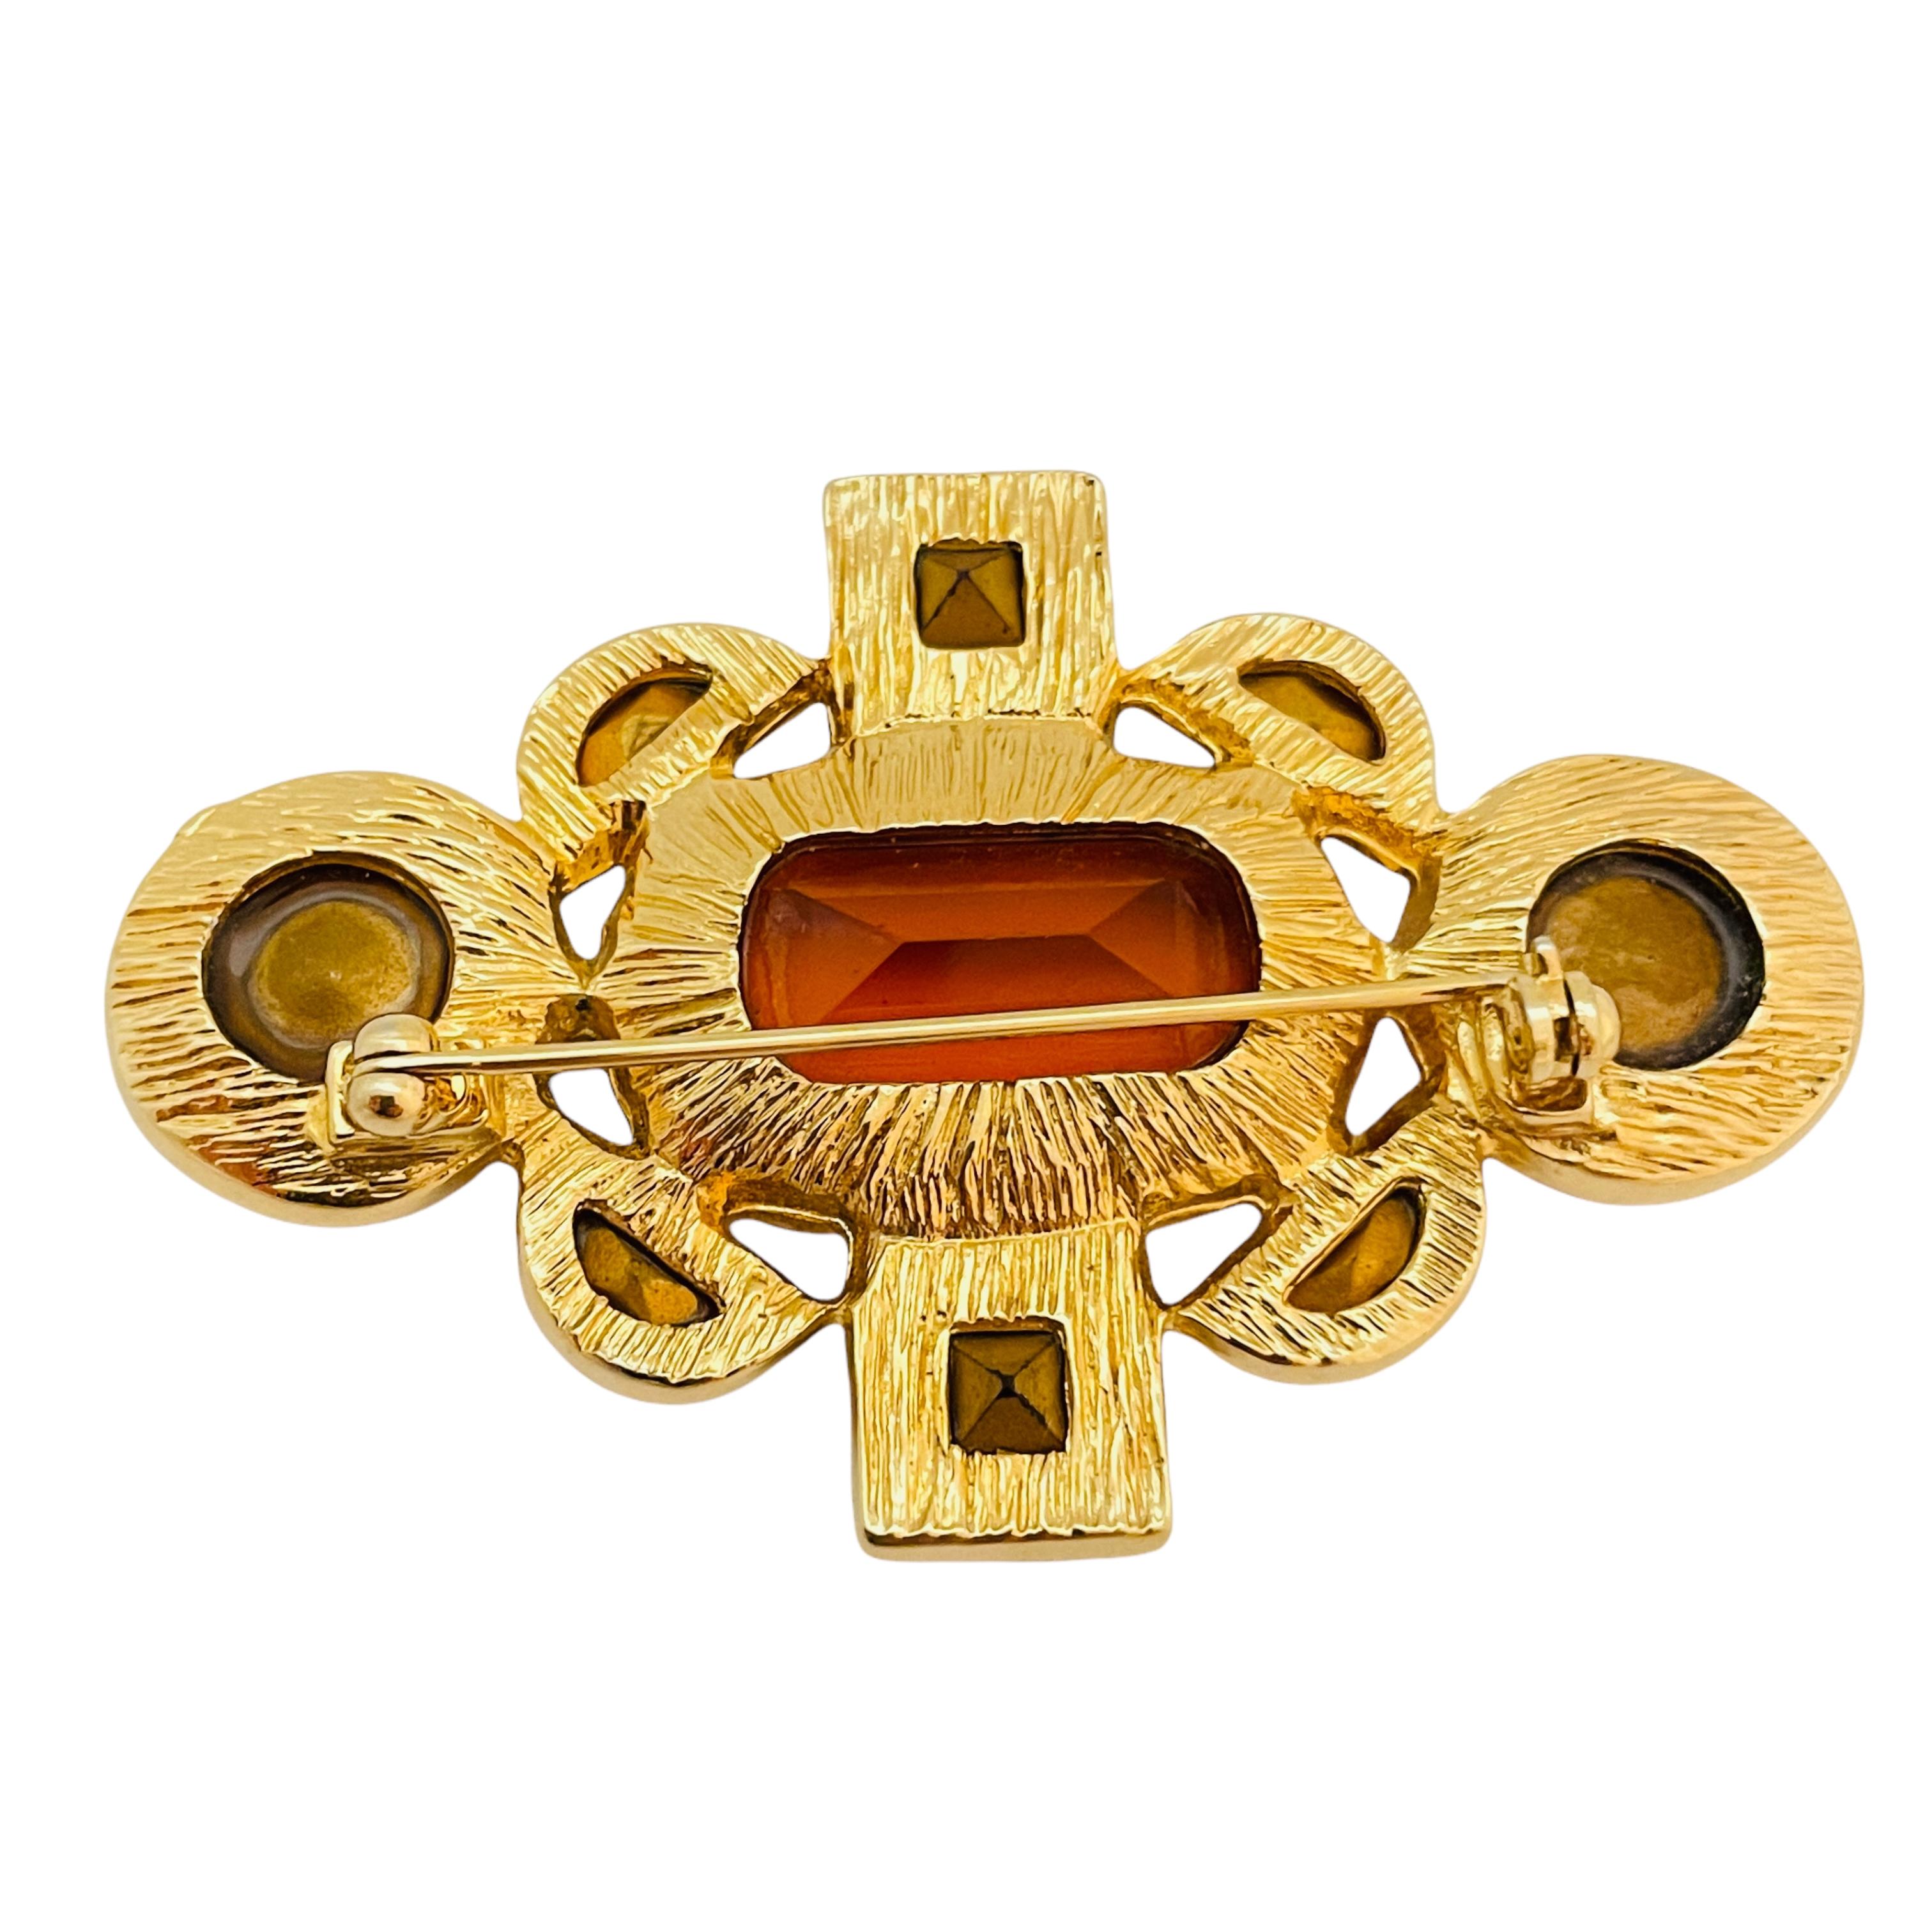 Vintage gold jewel faceted glass designer runway brooch In Good Condition For Sale In Palos Hills, IL